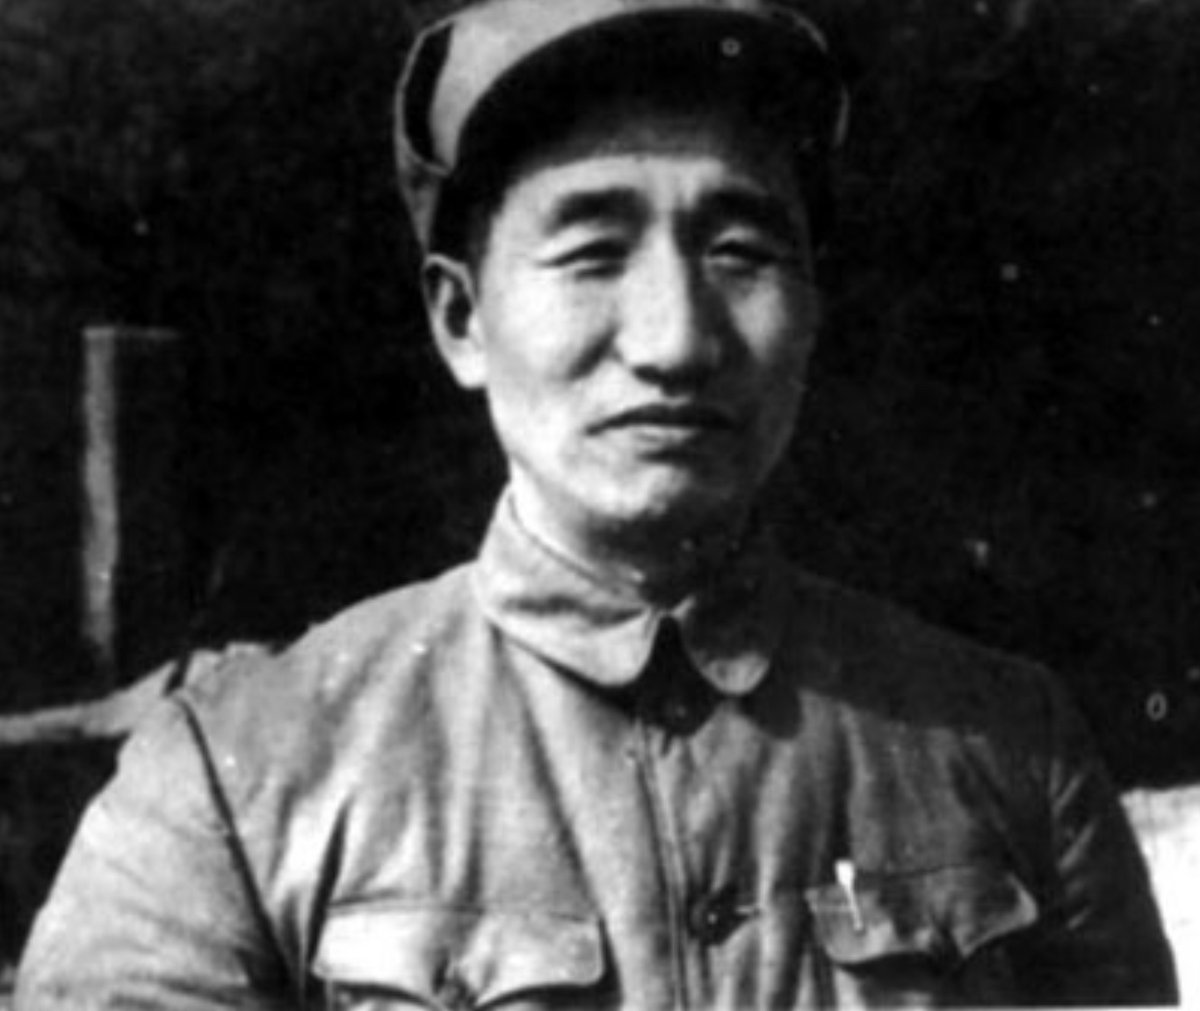 36) Xu Xiangqian, communist commander who defeated his former military school principal Yan Xishan in Battle for Taiyuan of 1948-49, bloodiest battle of the Civil War, incurring 45,000 killed and wounded in process. Later planned 1979 Sino-Vietnamese War. https://twitter.com/simonbchen/status/1294469935318487040?s=20